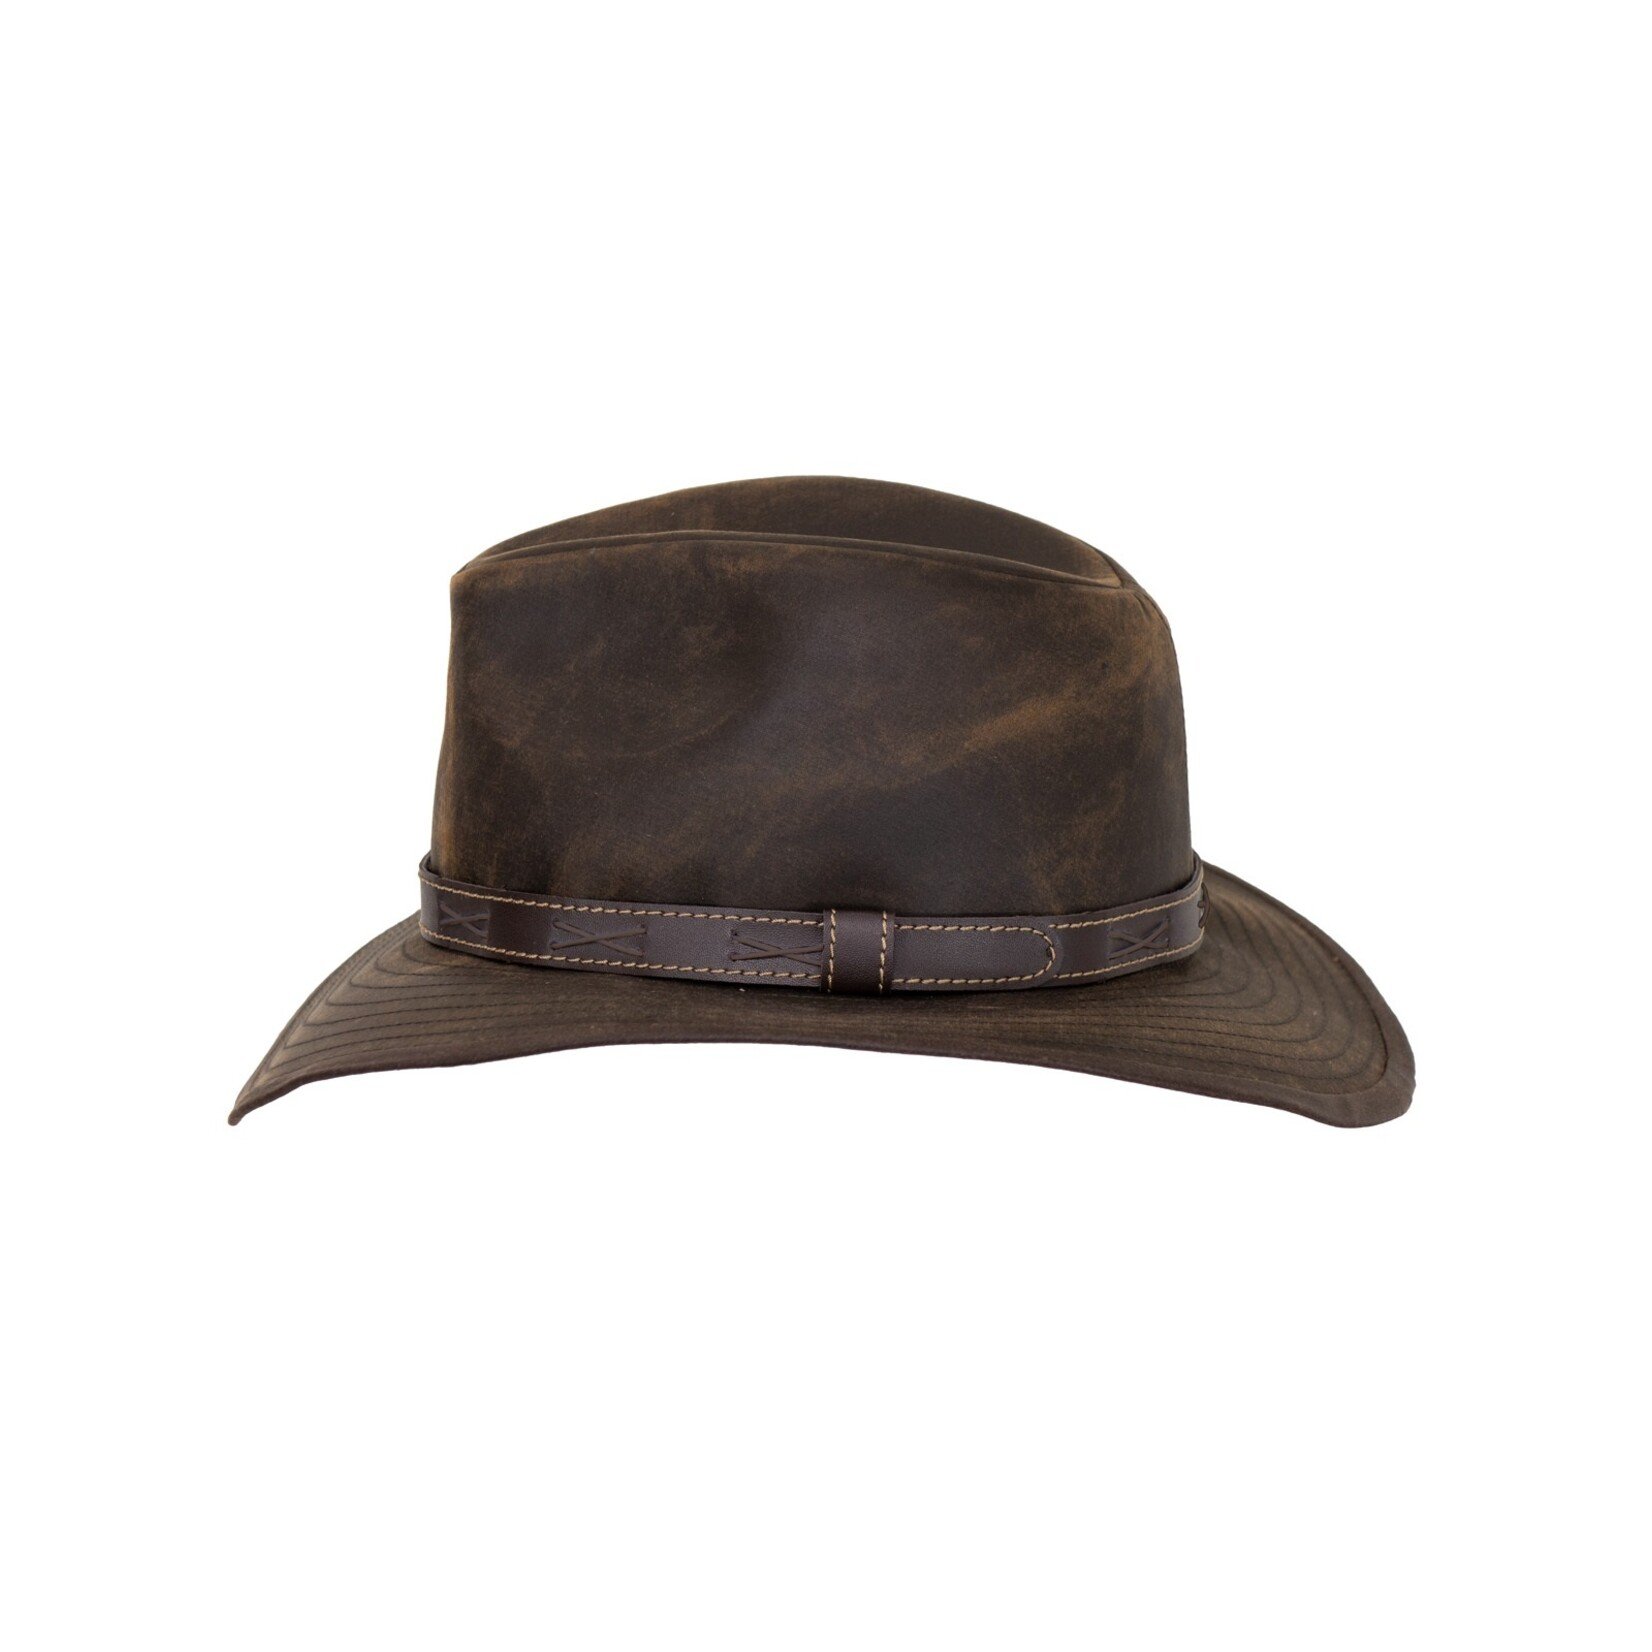 Traditional Hat Brown Loden Hunter-Hiking Hat Hunting Fisherman